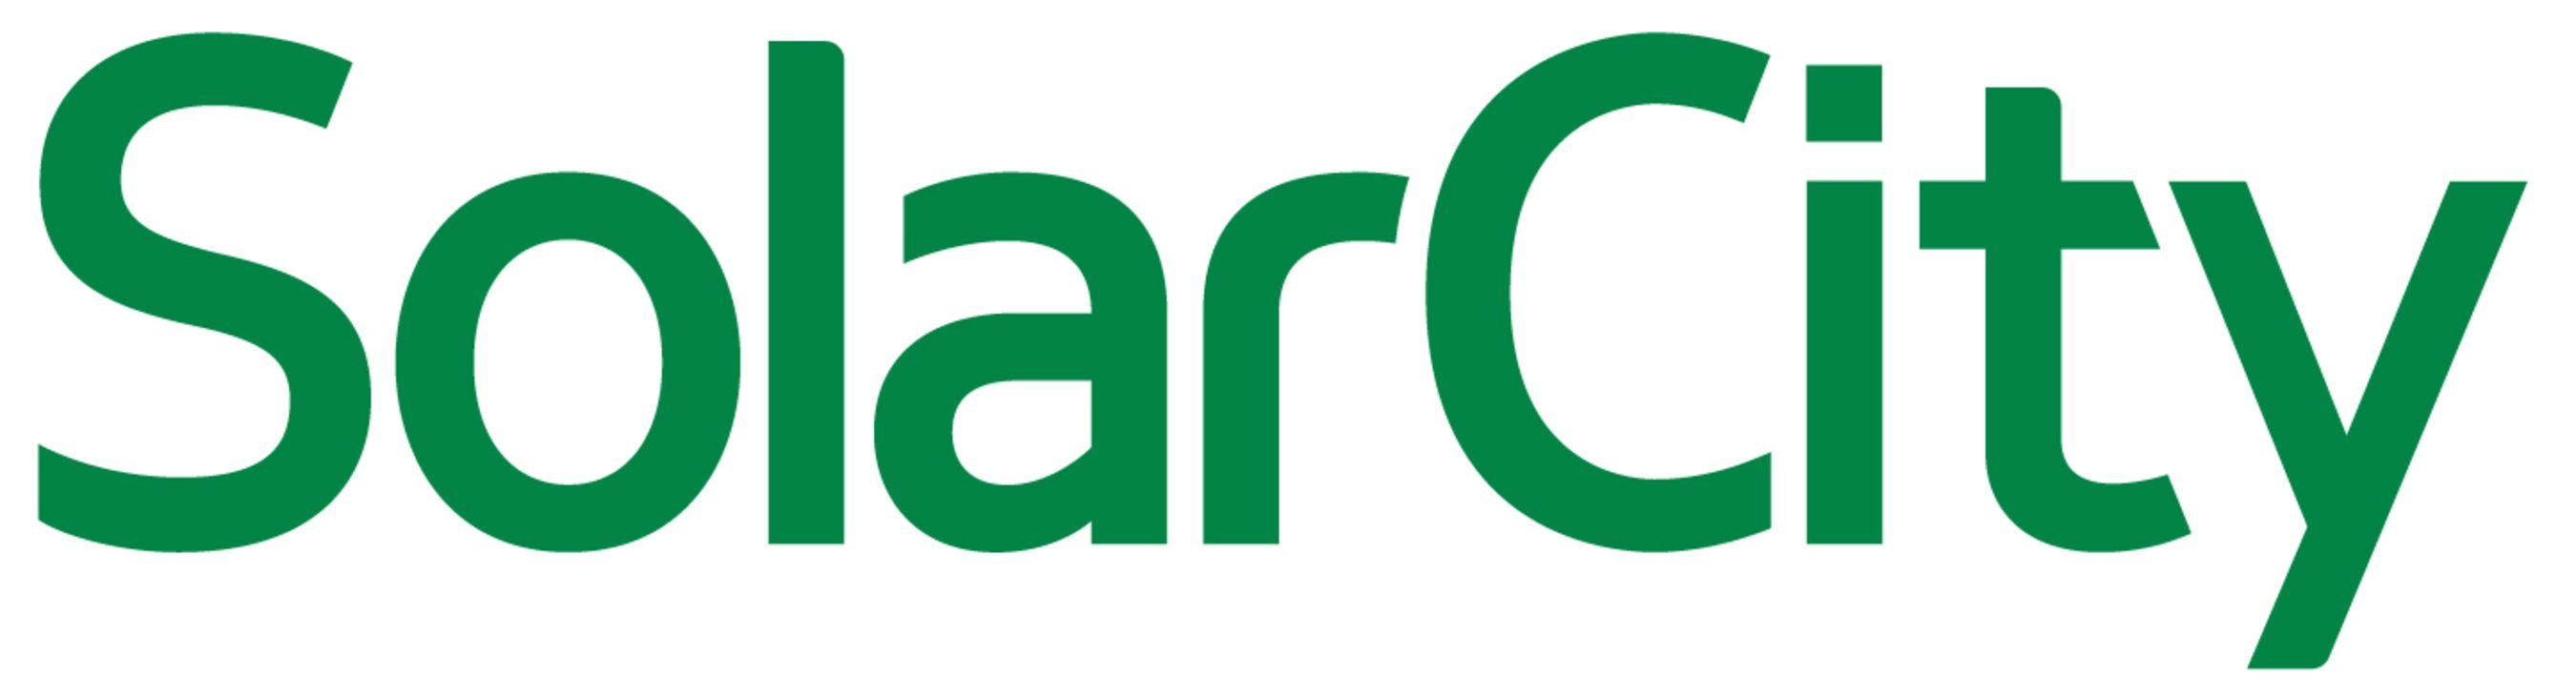 SolarCity Corporation Logo - SolarCity Launches Residential Service for South Carolina